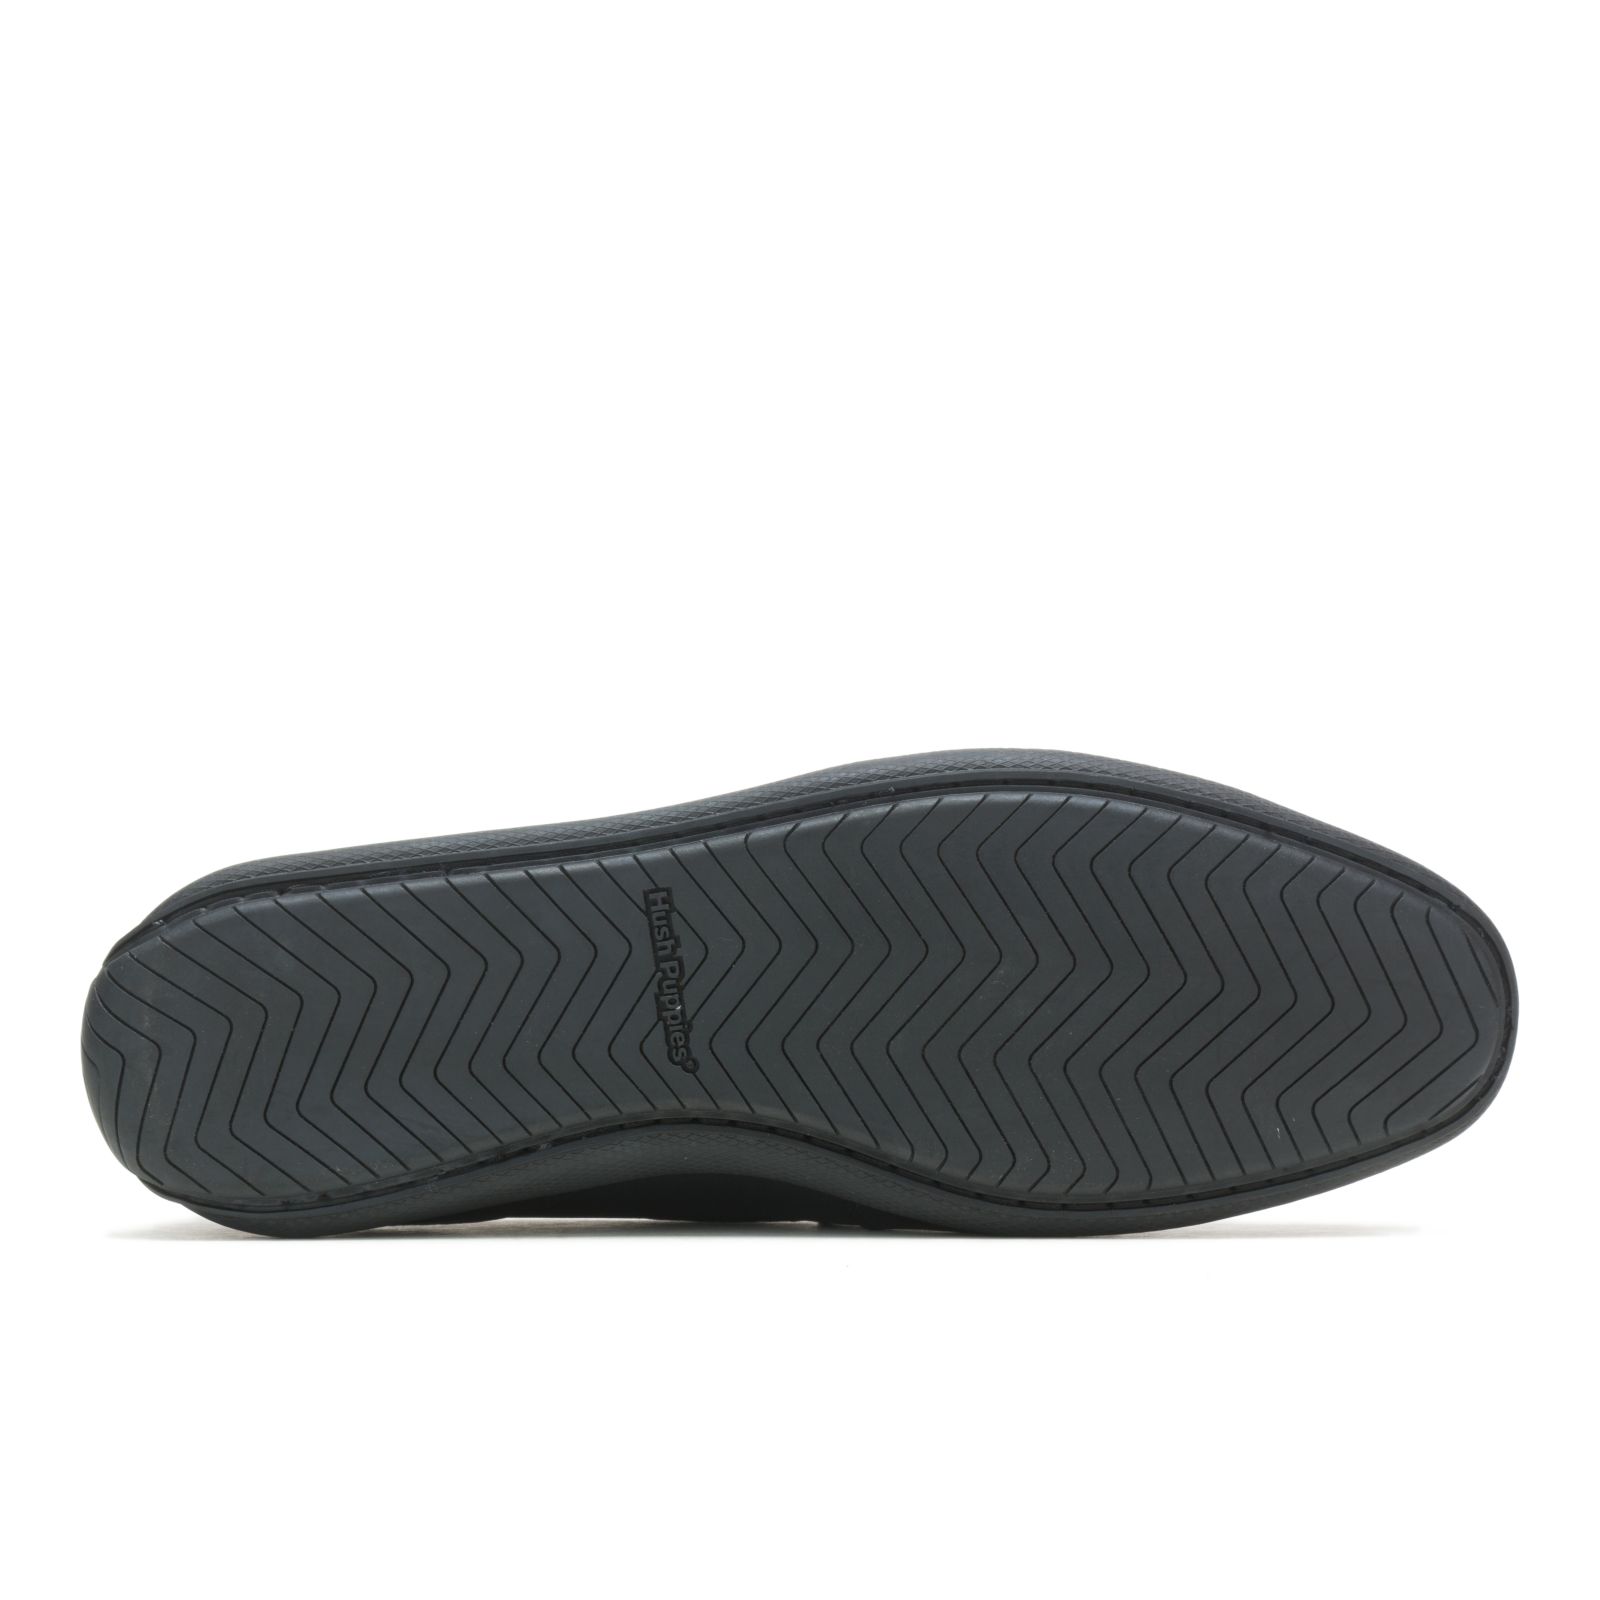 Loafers Hush Puppies Finley Hombre Negros | GMIUCSB-46